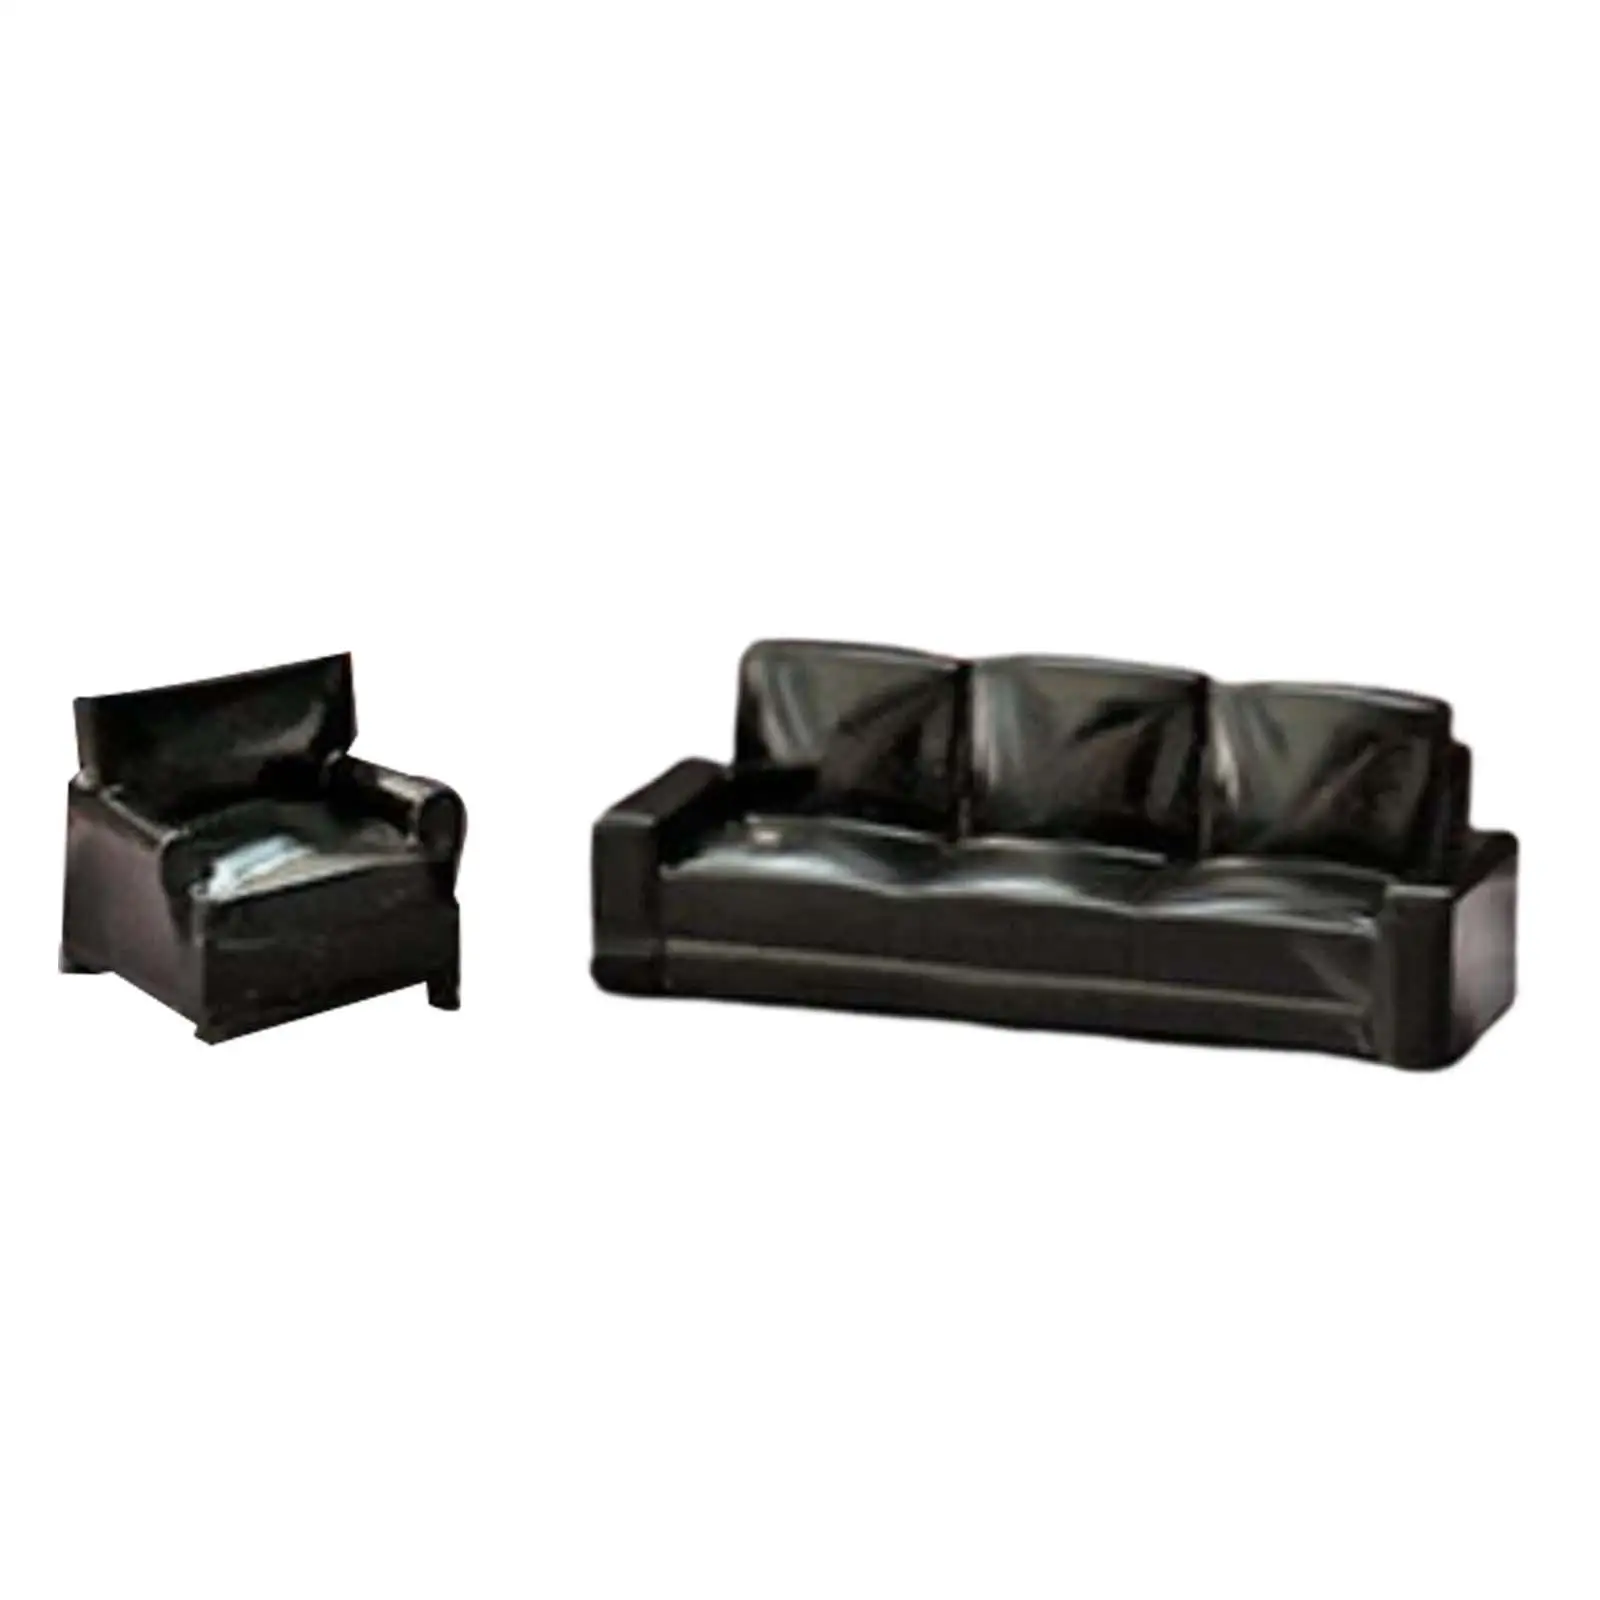 2x Dollhouse Sofa Couch for 1/64 Scale Dollhouse DIY Model Photography Props